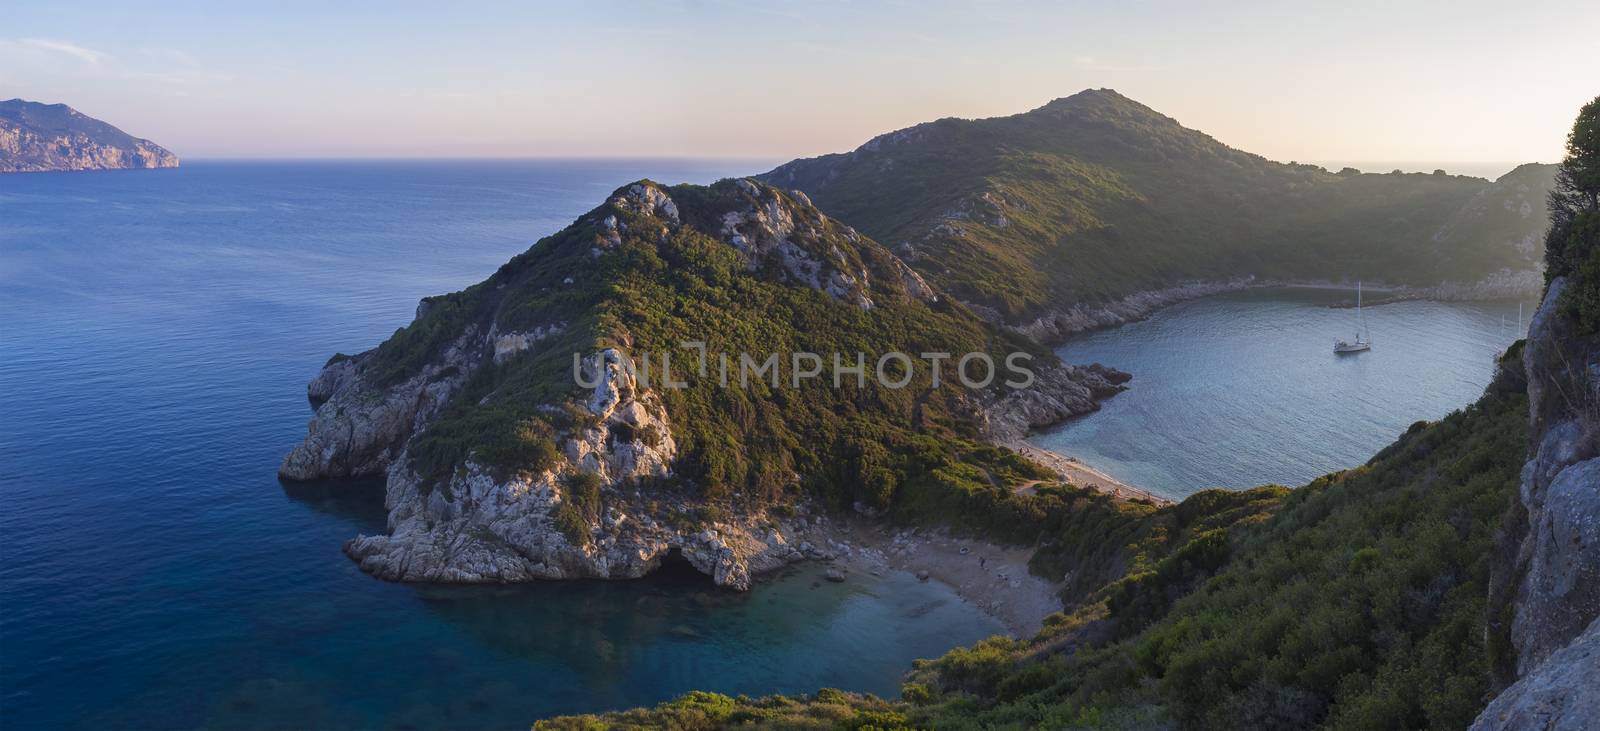 Corfu, Greece, Porto Timoni. View of the most famous double beach and bay in Afionas from the view point on the path. Sunset golden pink light.